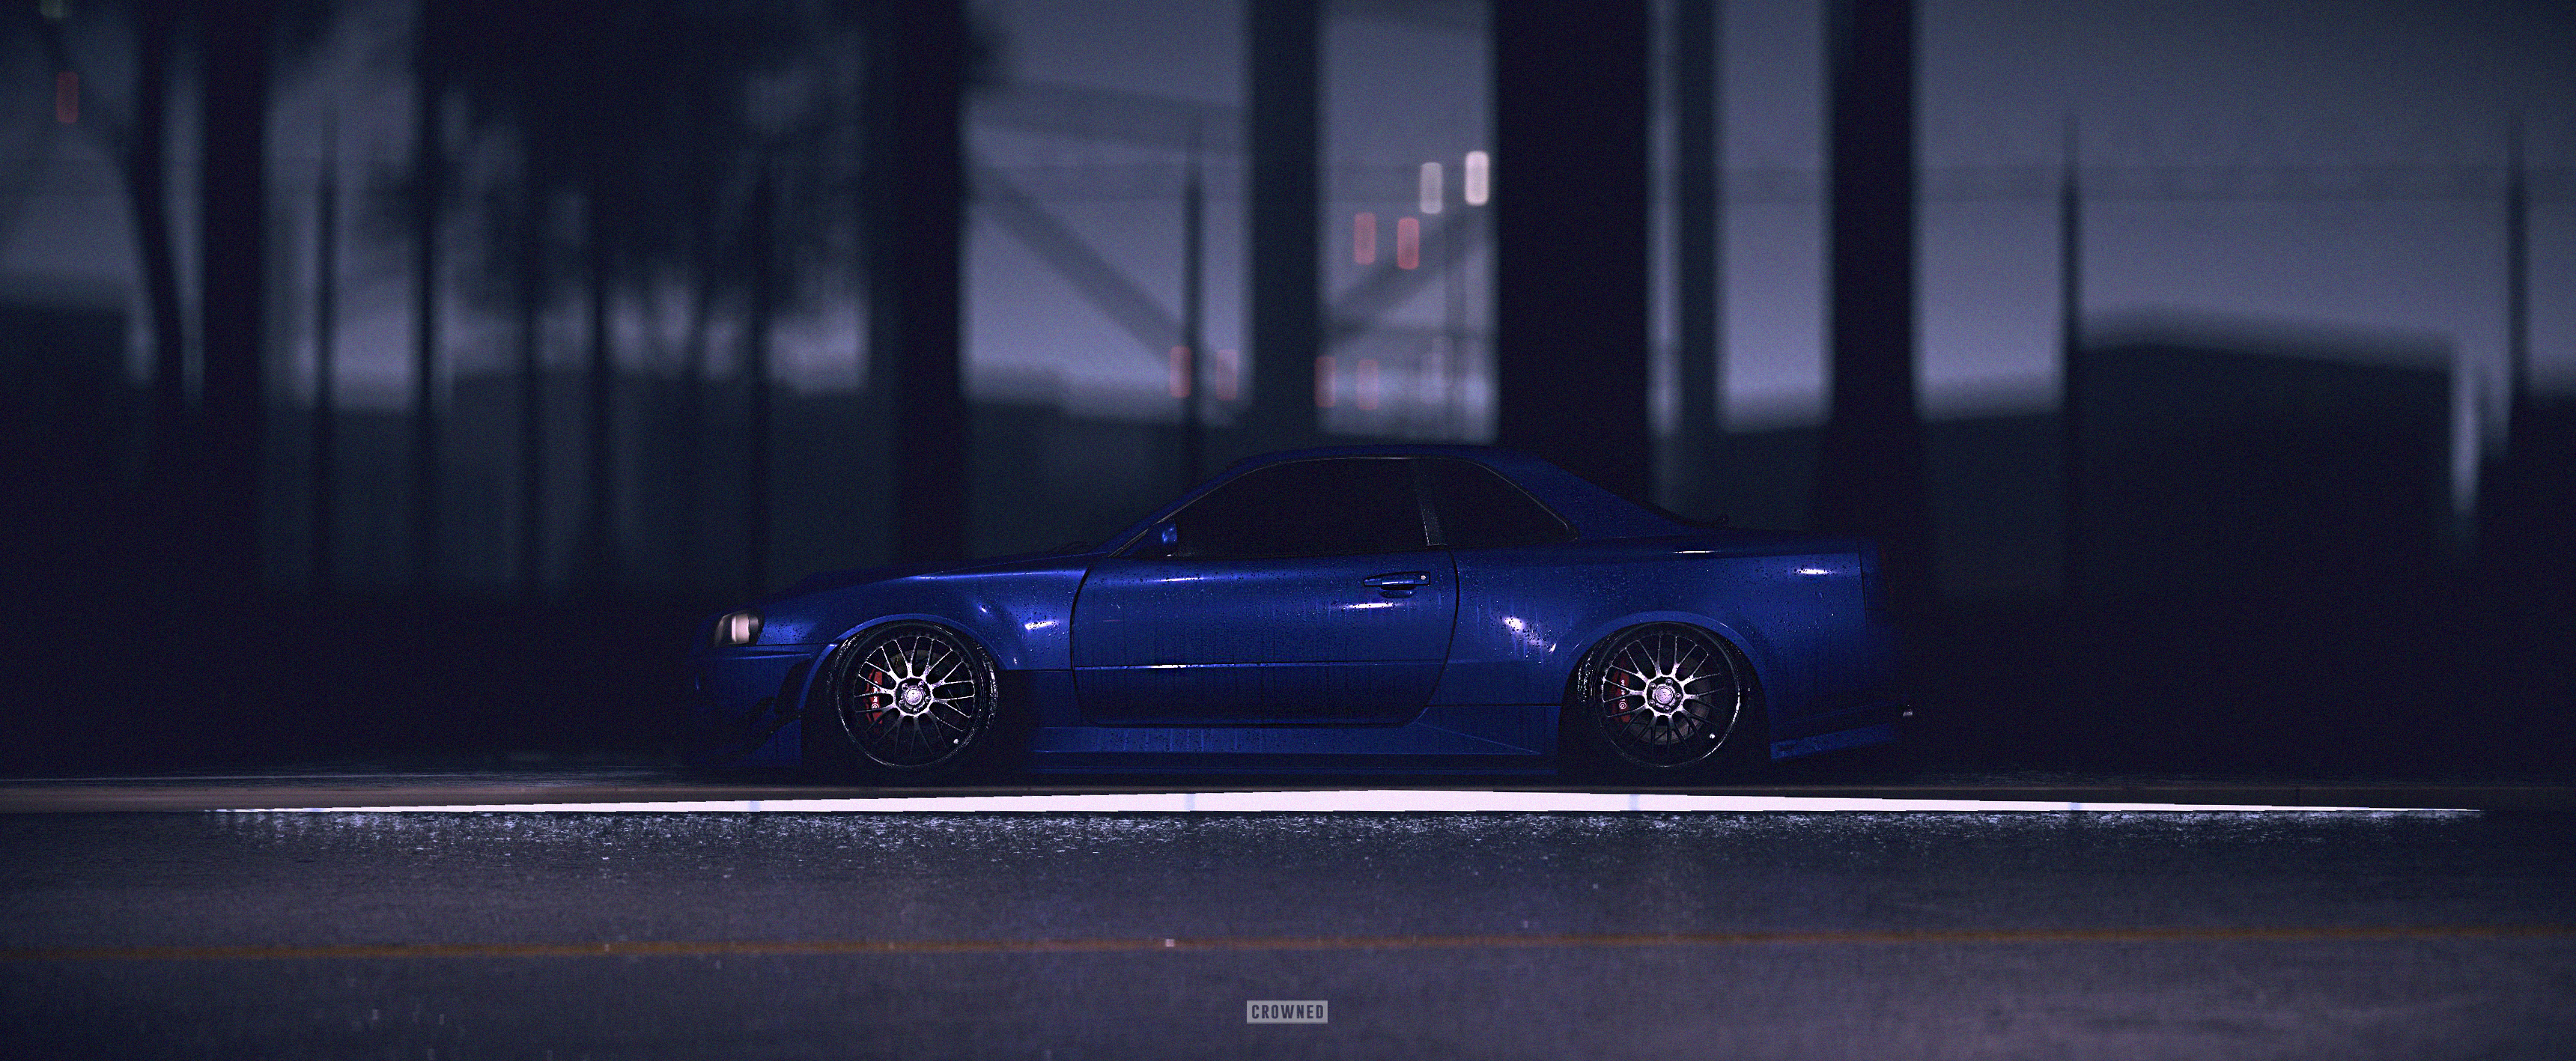 CROWNED, Need for Speed, Nissan Skyline GT R R34 Wallpaper